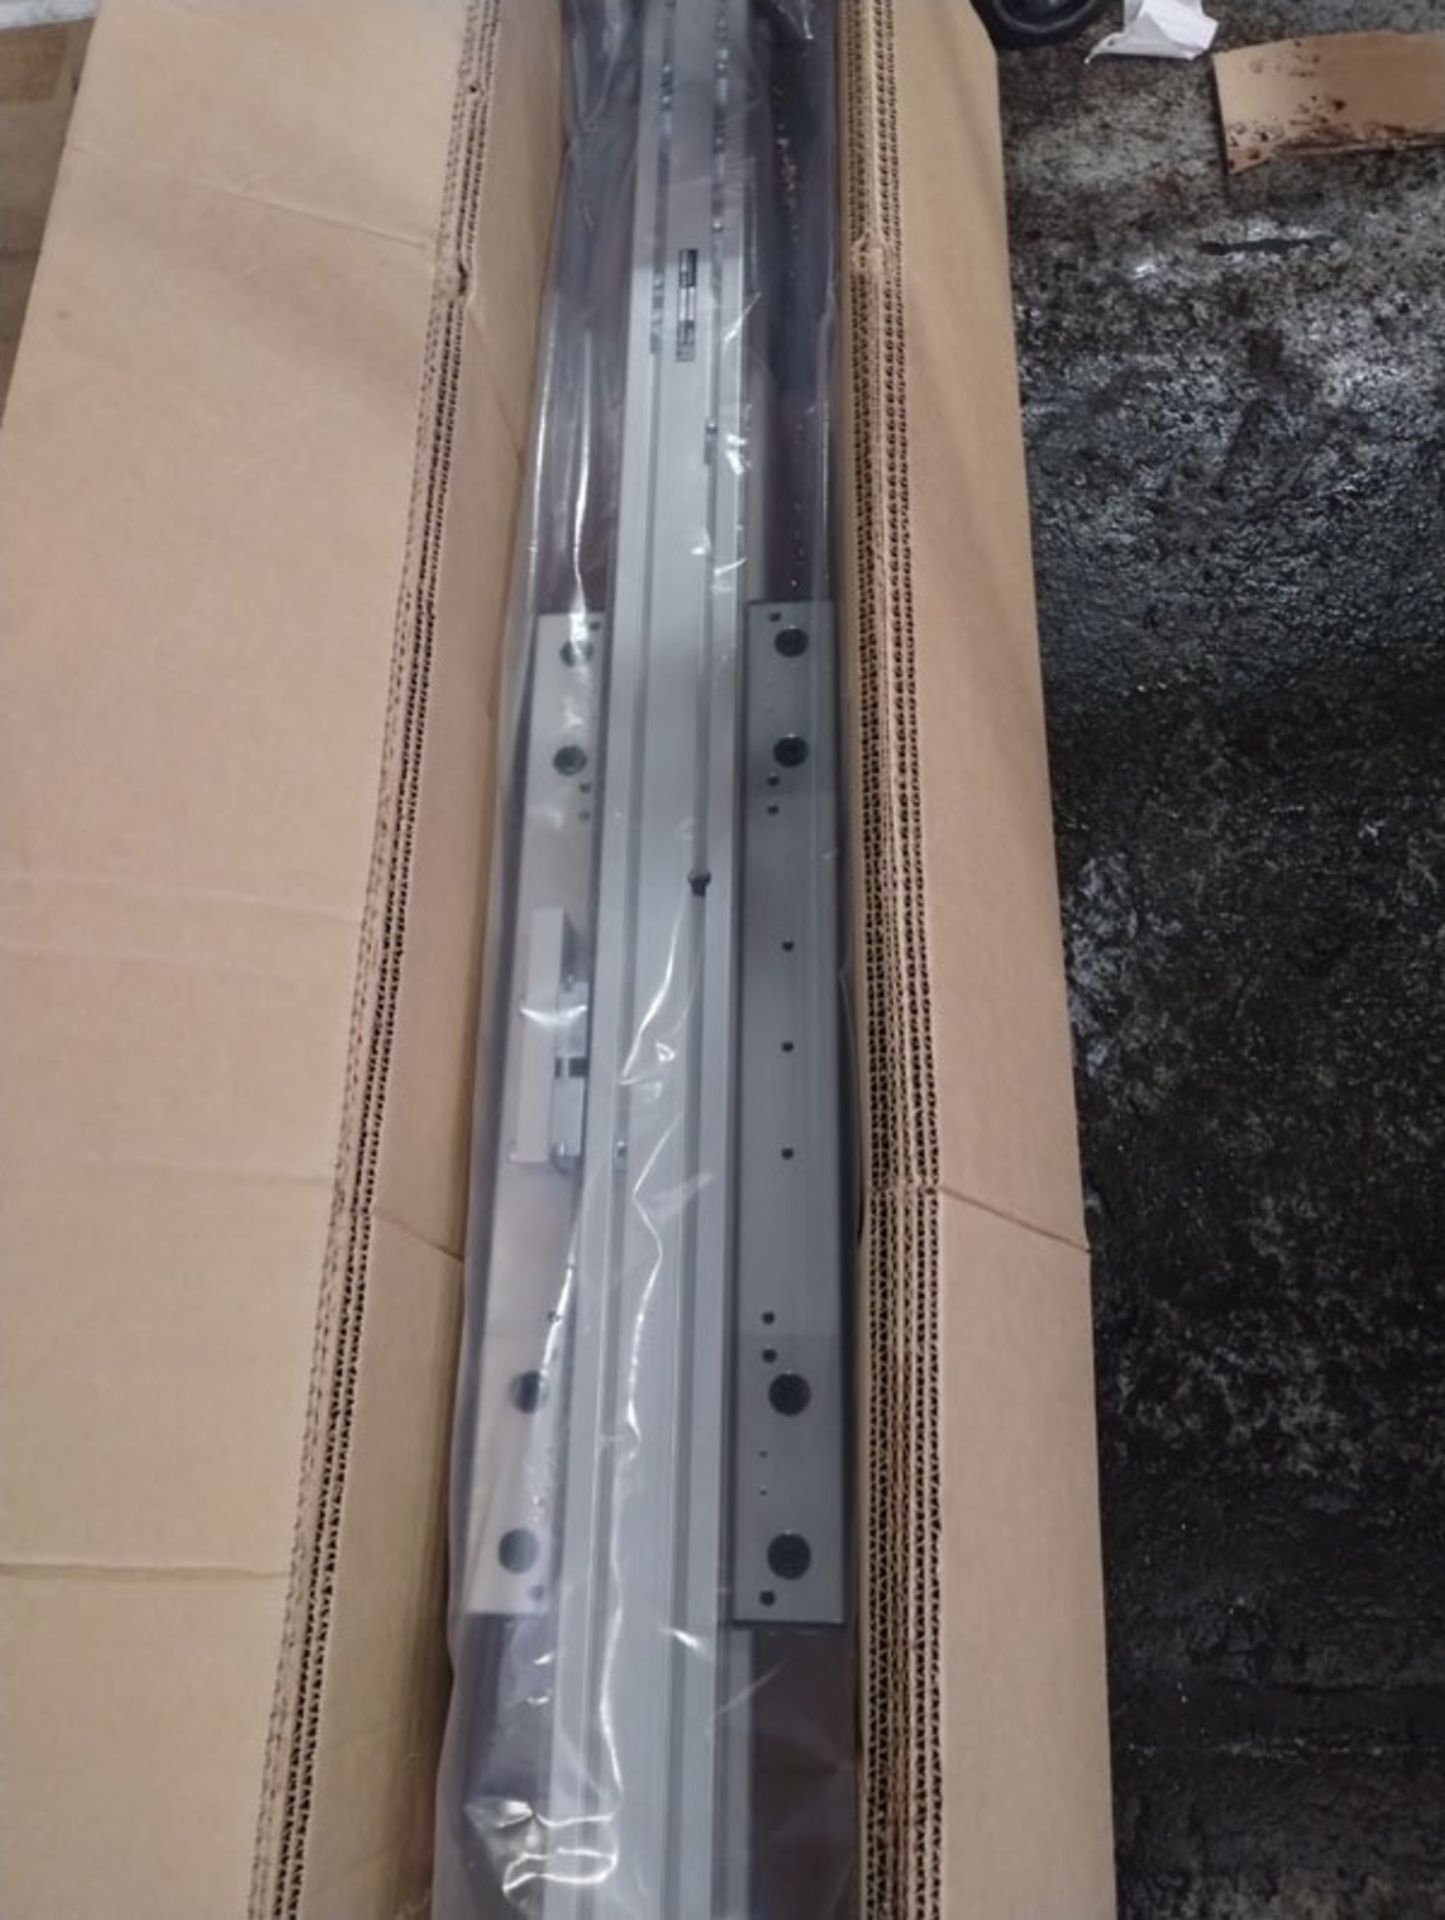 147" LINEAR ACTUATOR PART# 11237A01 --- Lot located at second location: 6800 Union ave. , Cleveland - Image 5 of 7